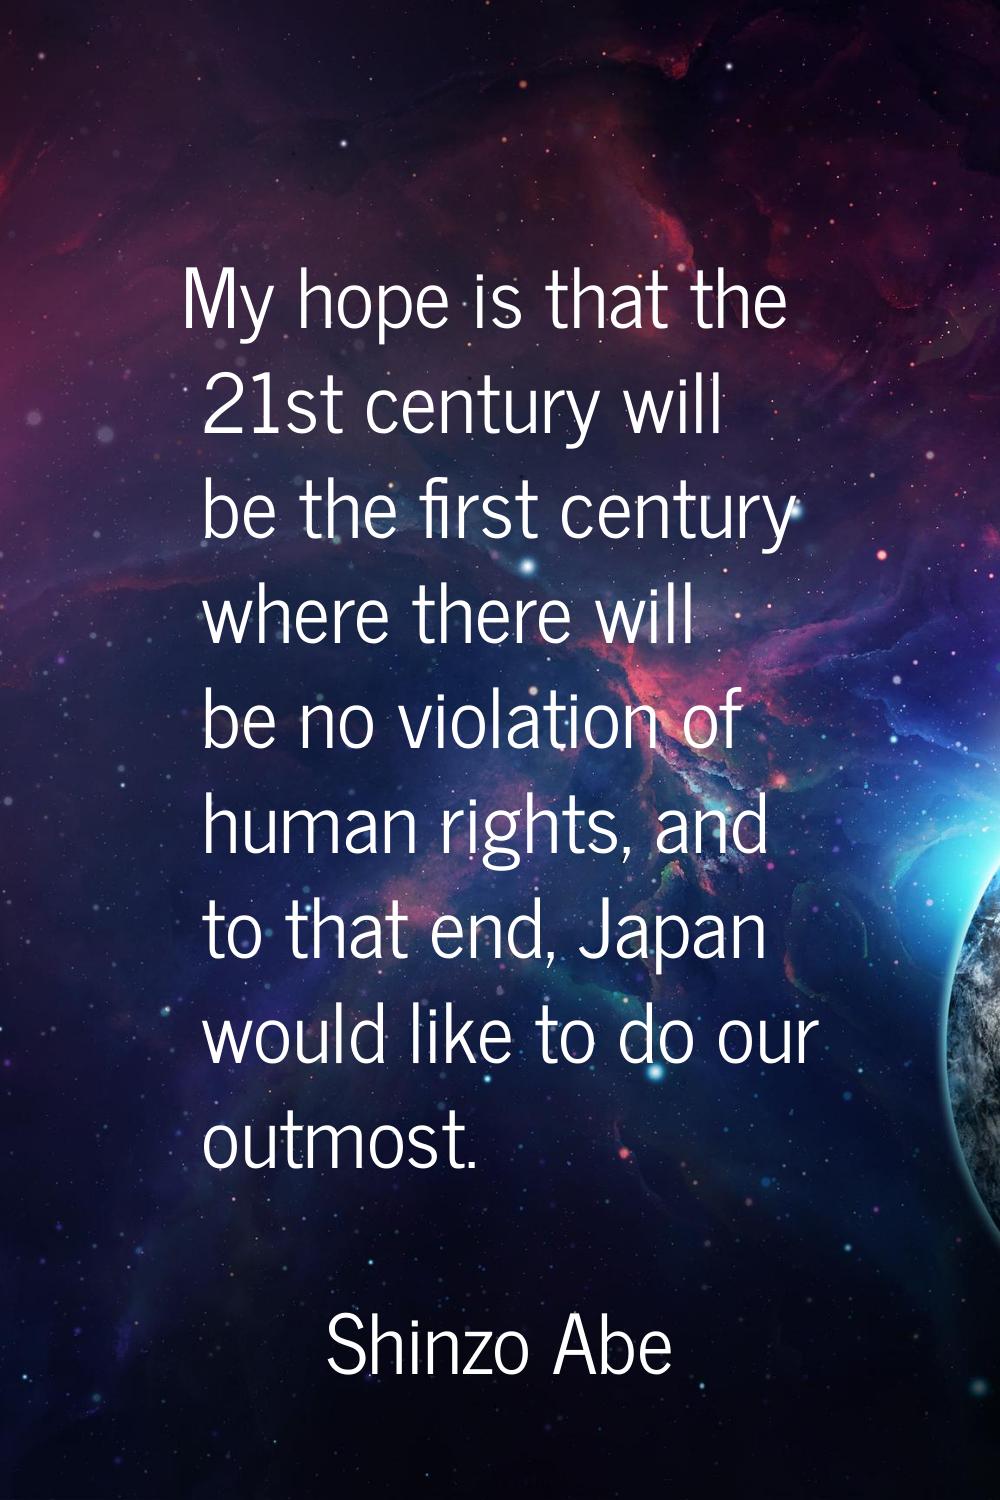 My hope is that the 21st century will be the first century where there will be no violation of huma